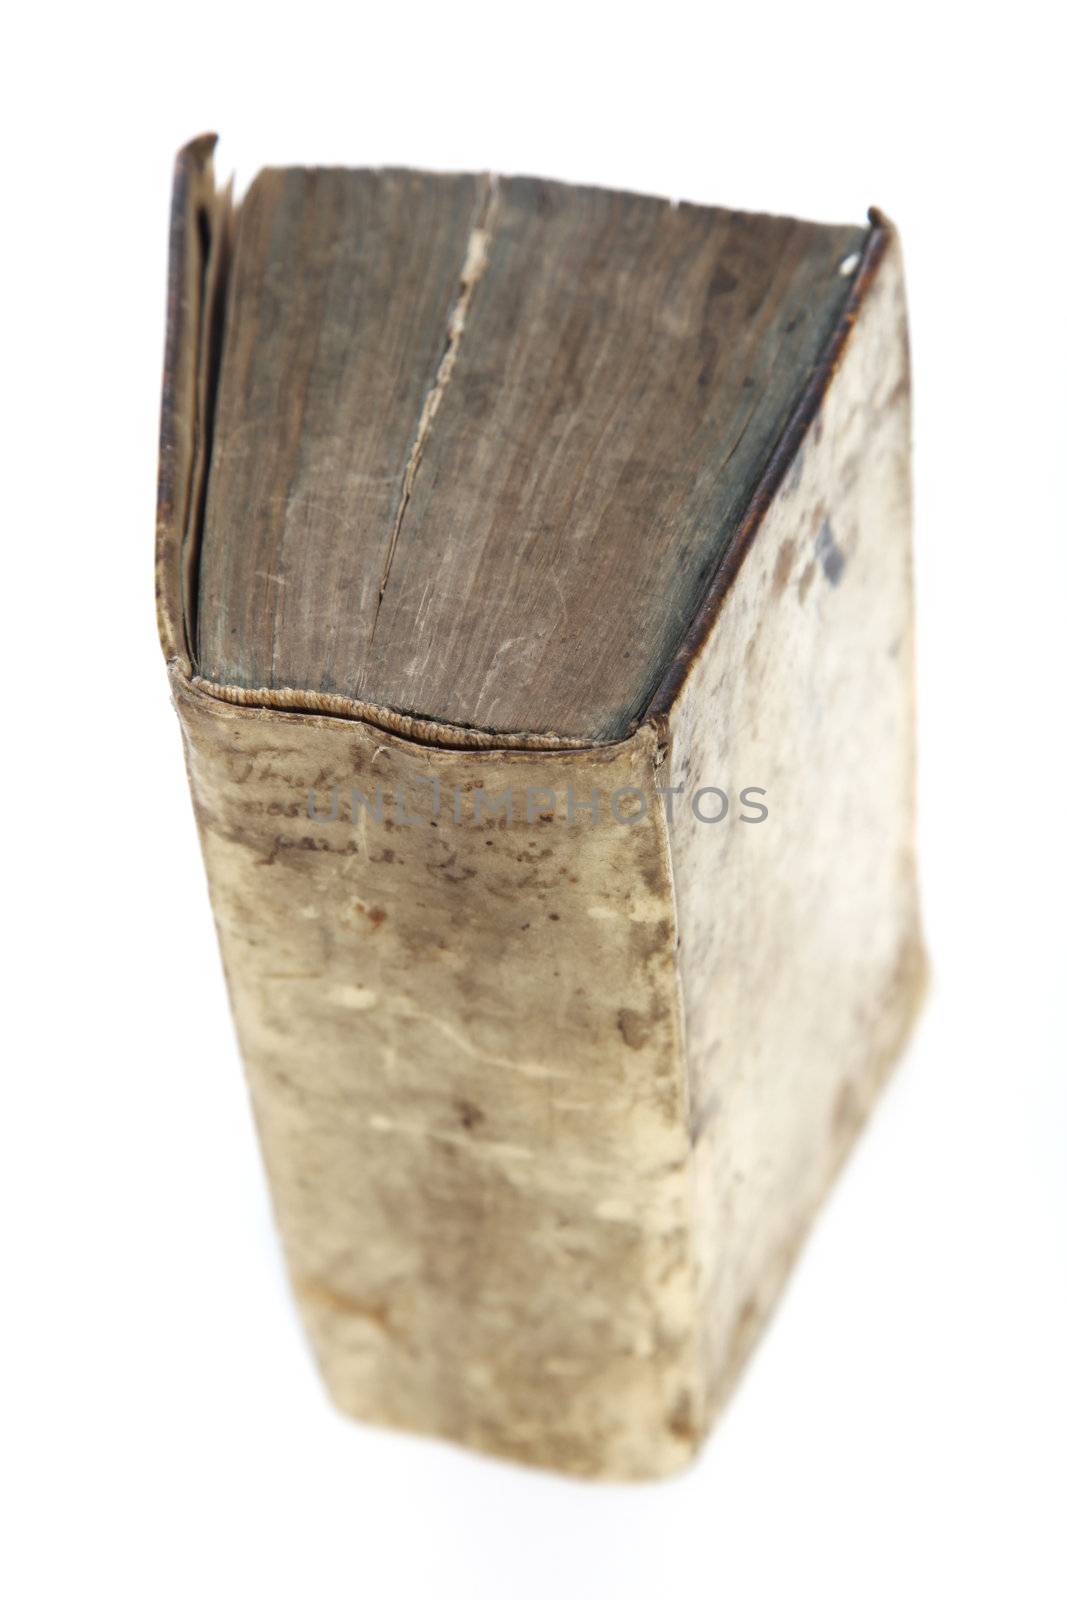 Old worn vintage book by Farina6000